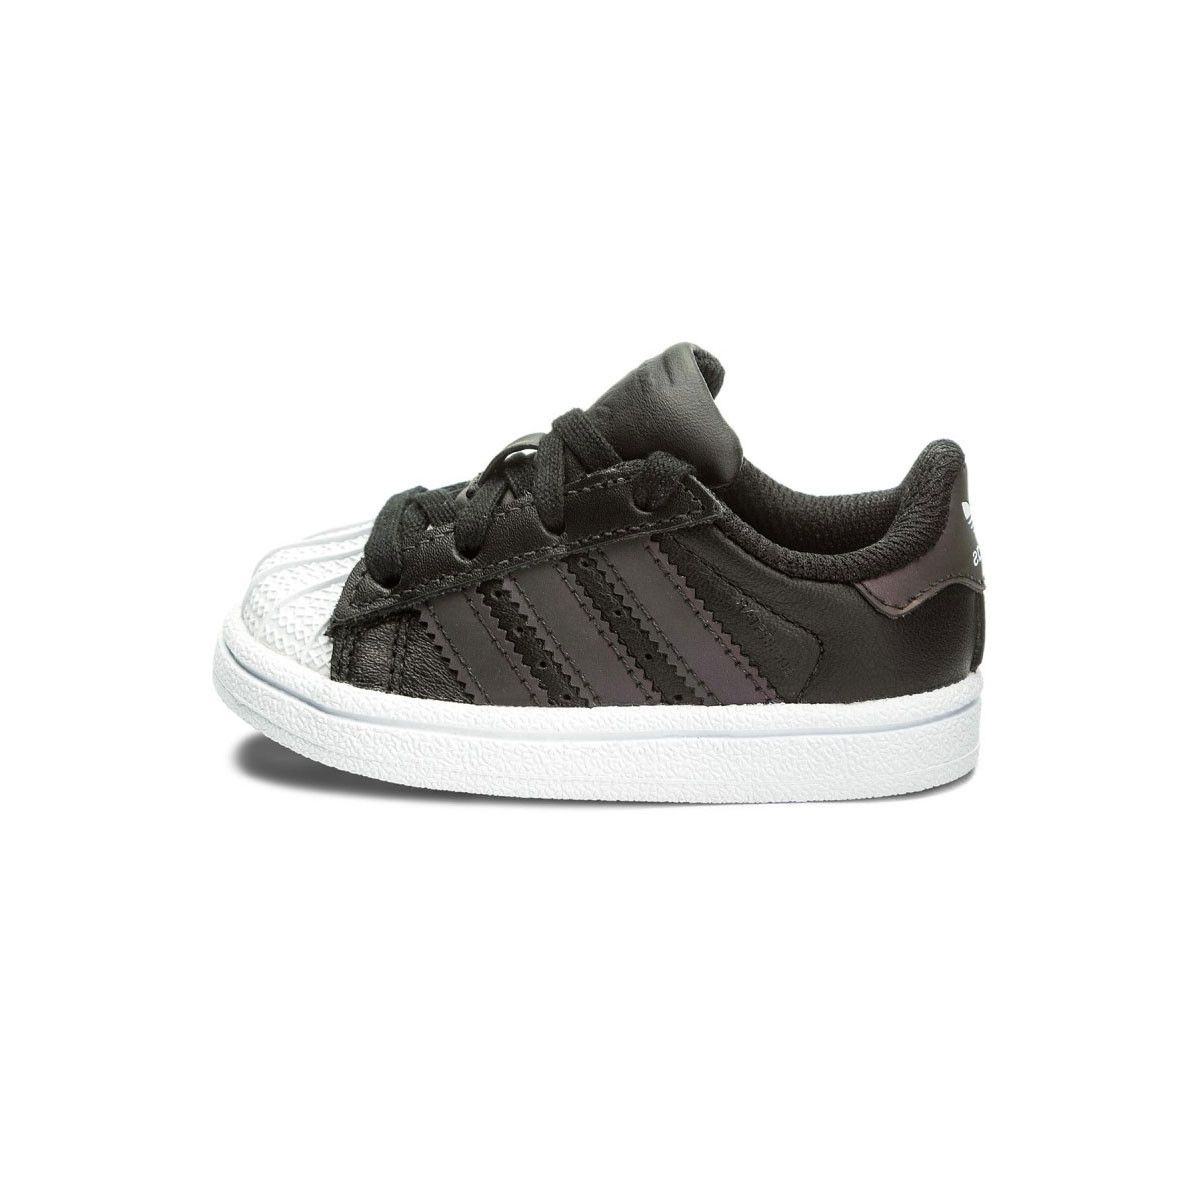 Superstar Adidas Bebe Buy Clothes Shoes Online